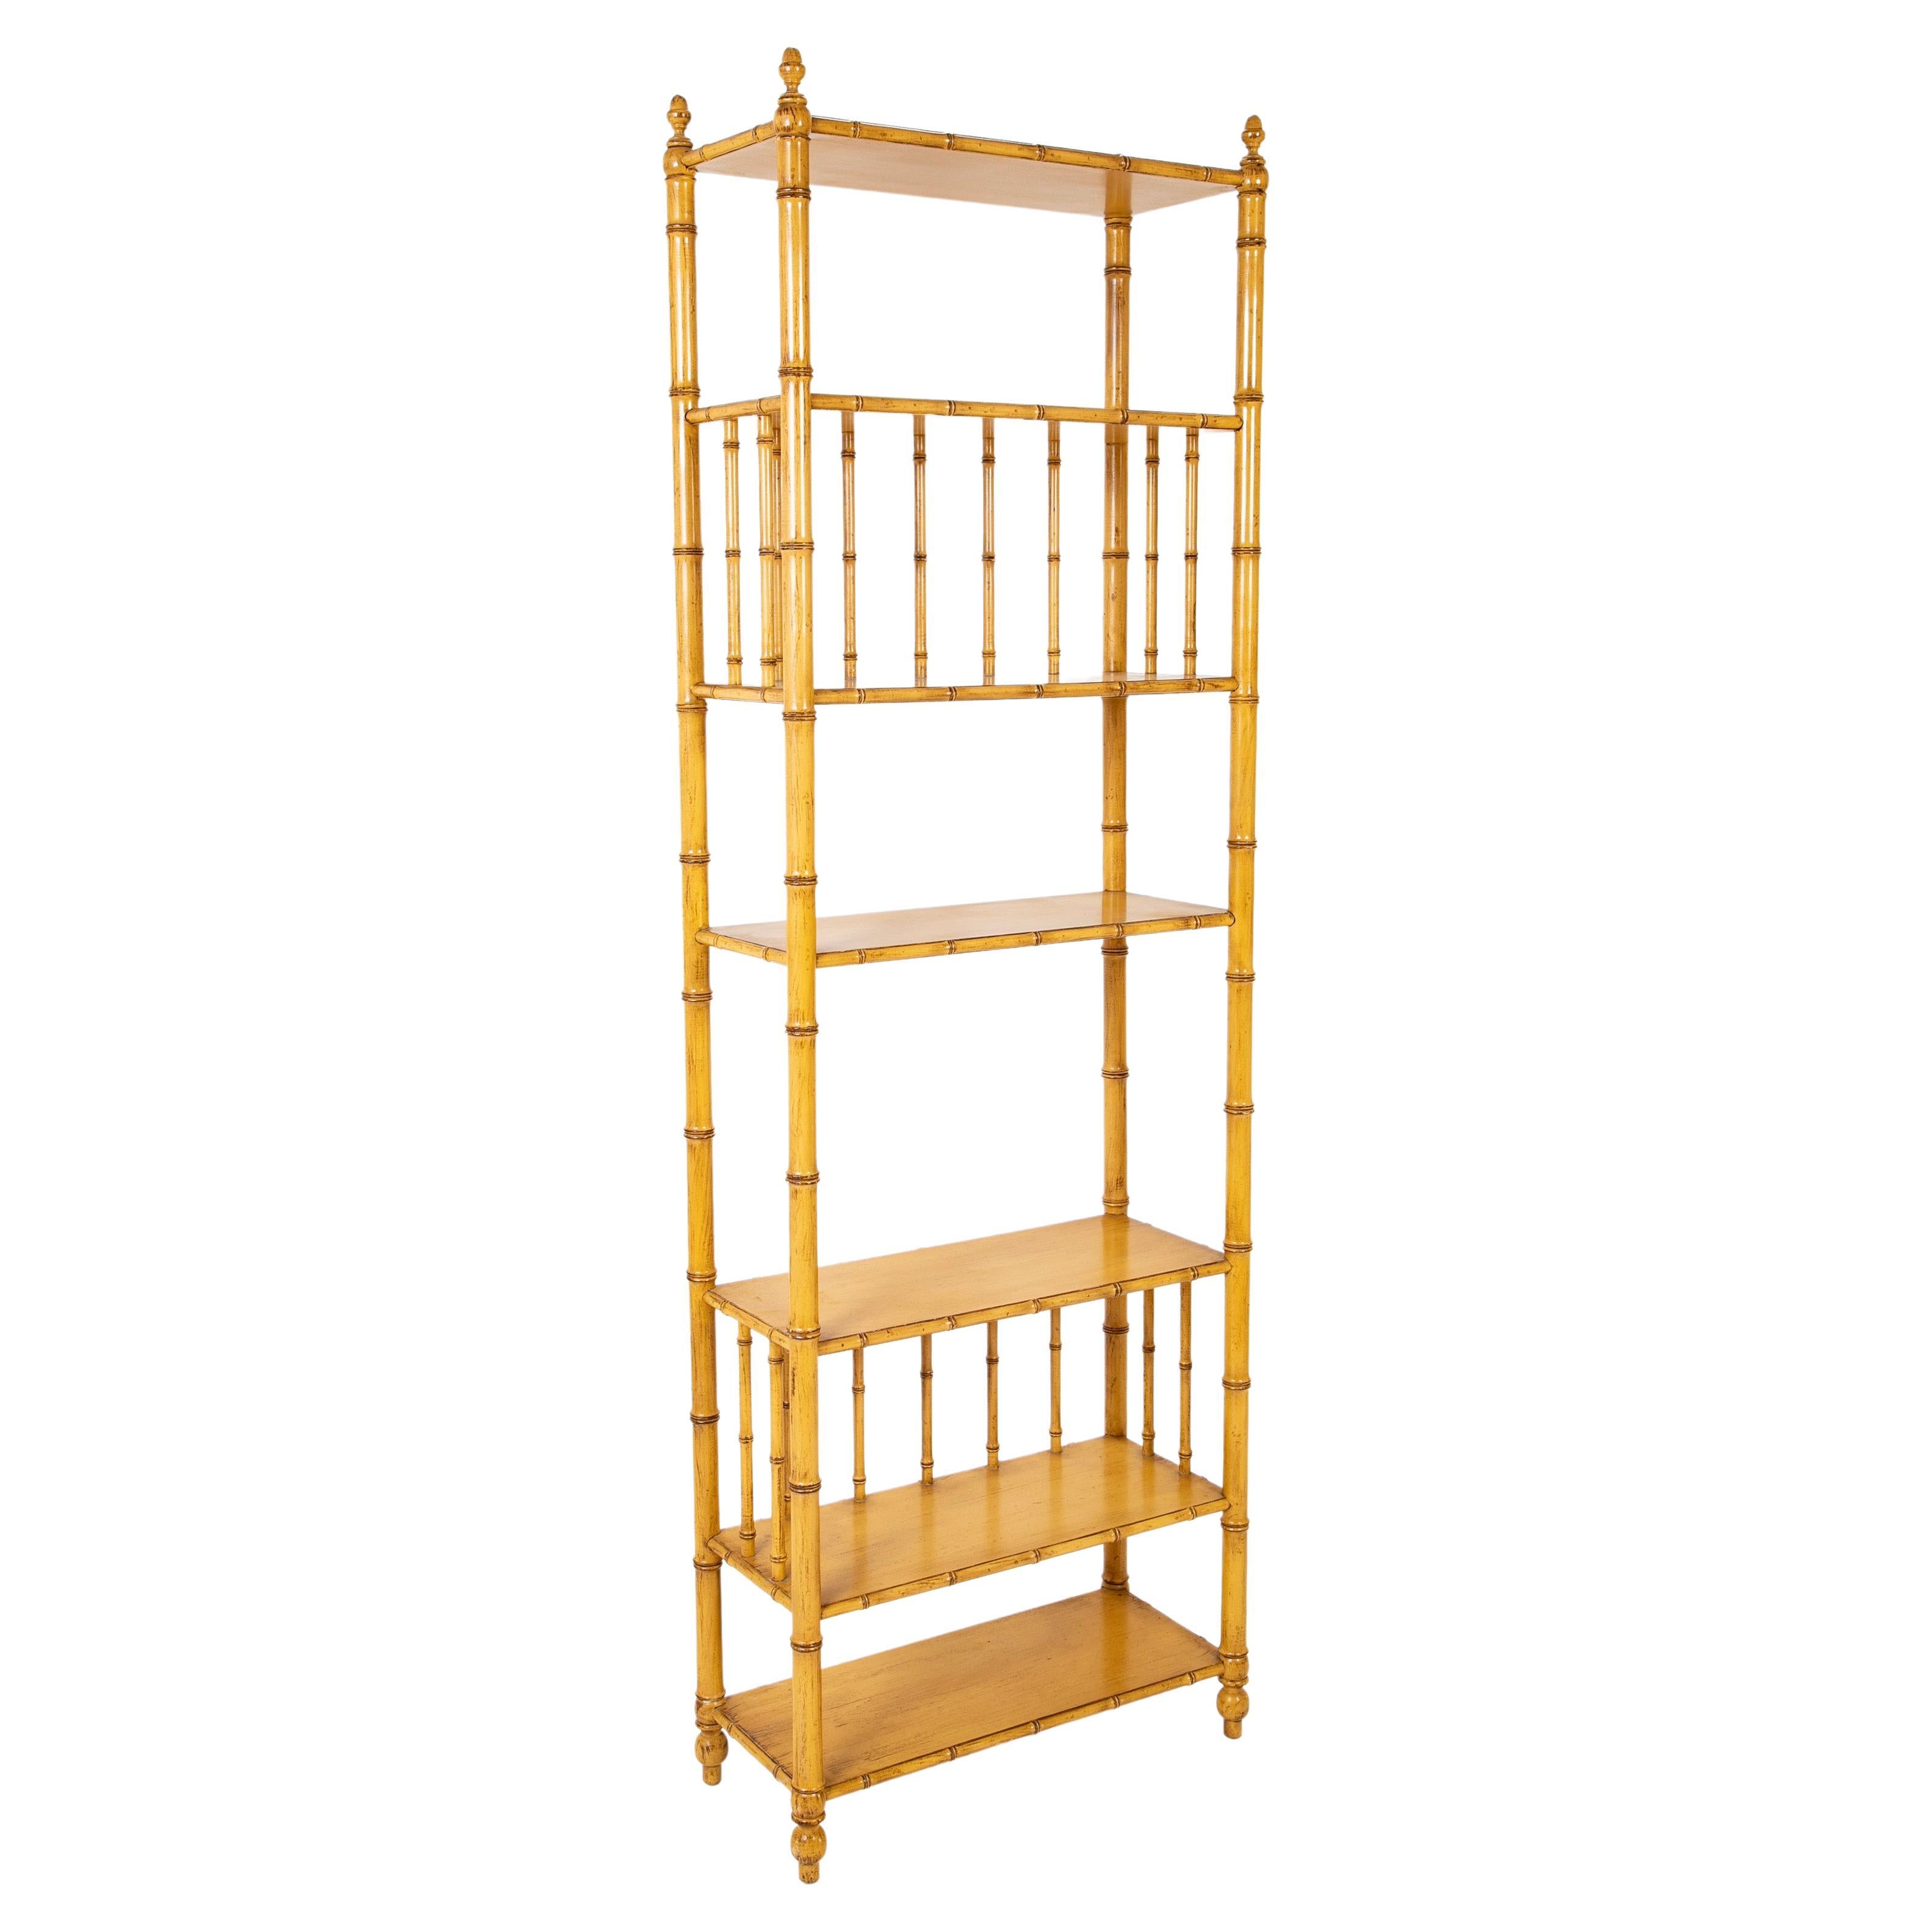 Great pair of faux bamboo tall shelves beautifully painted in a pale yellow finish. Each with six shelves of varying heights, they make wonderful displays for your cherished collections and books. Very rare to find a pair of these mid 20th century